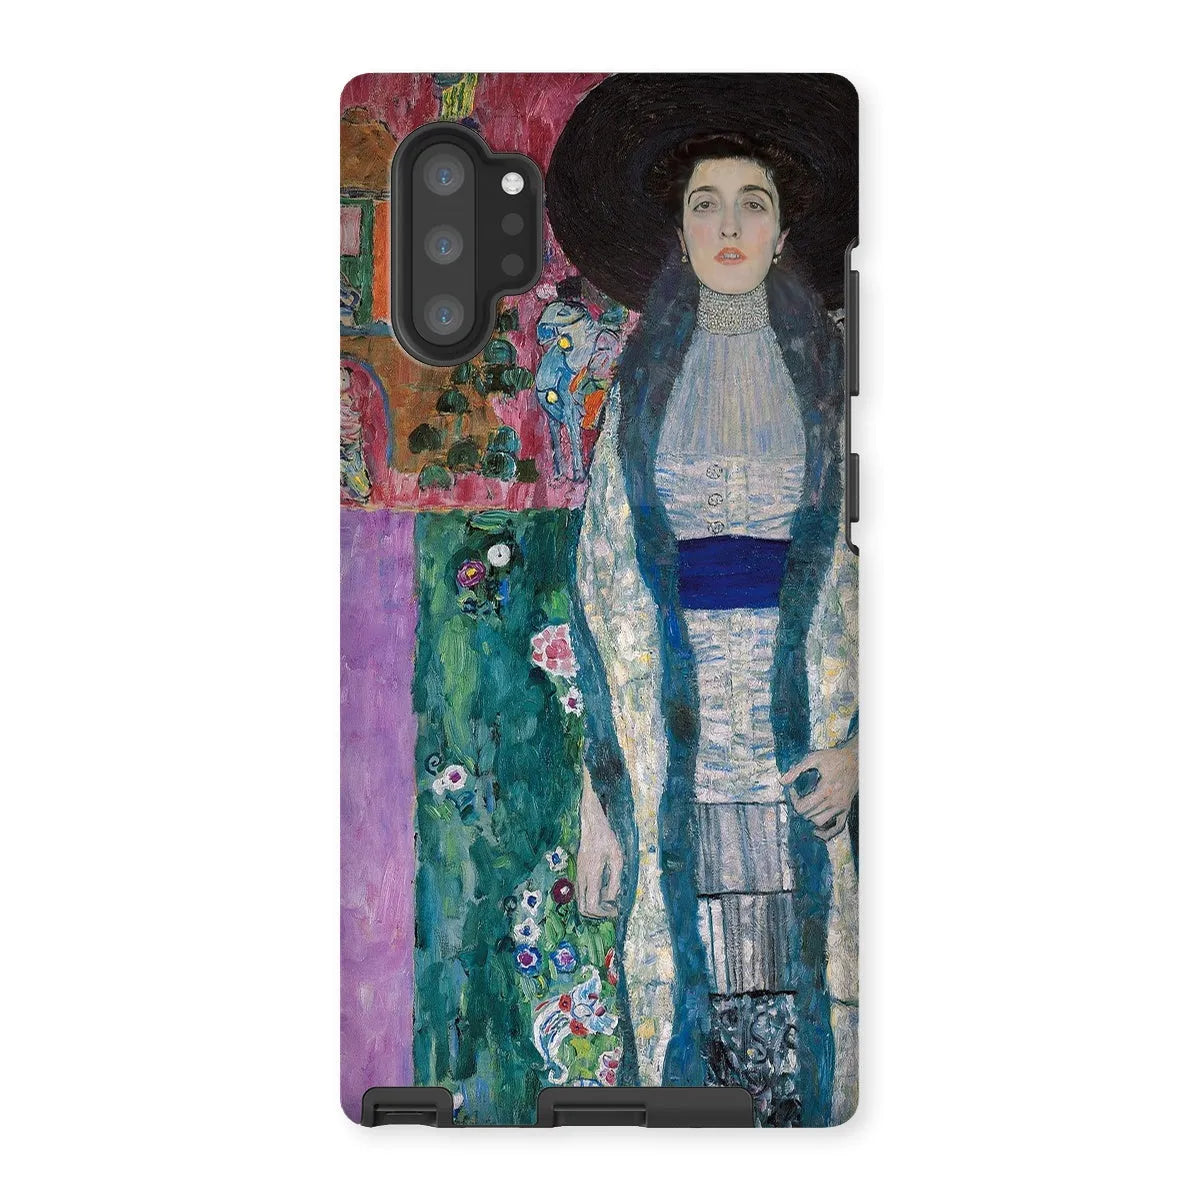 Adele Bloch-bauer By Gustav Klimt Tough Phone Case - Samsung Galaxy Note 10p / Matte - Mobile Phone Cases - Aesthetic